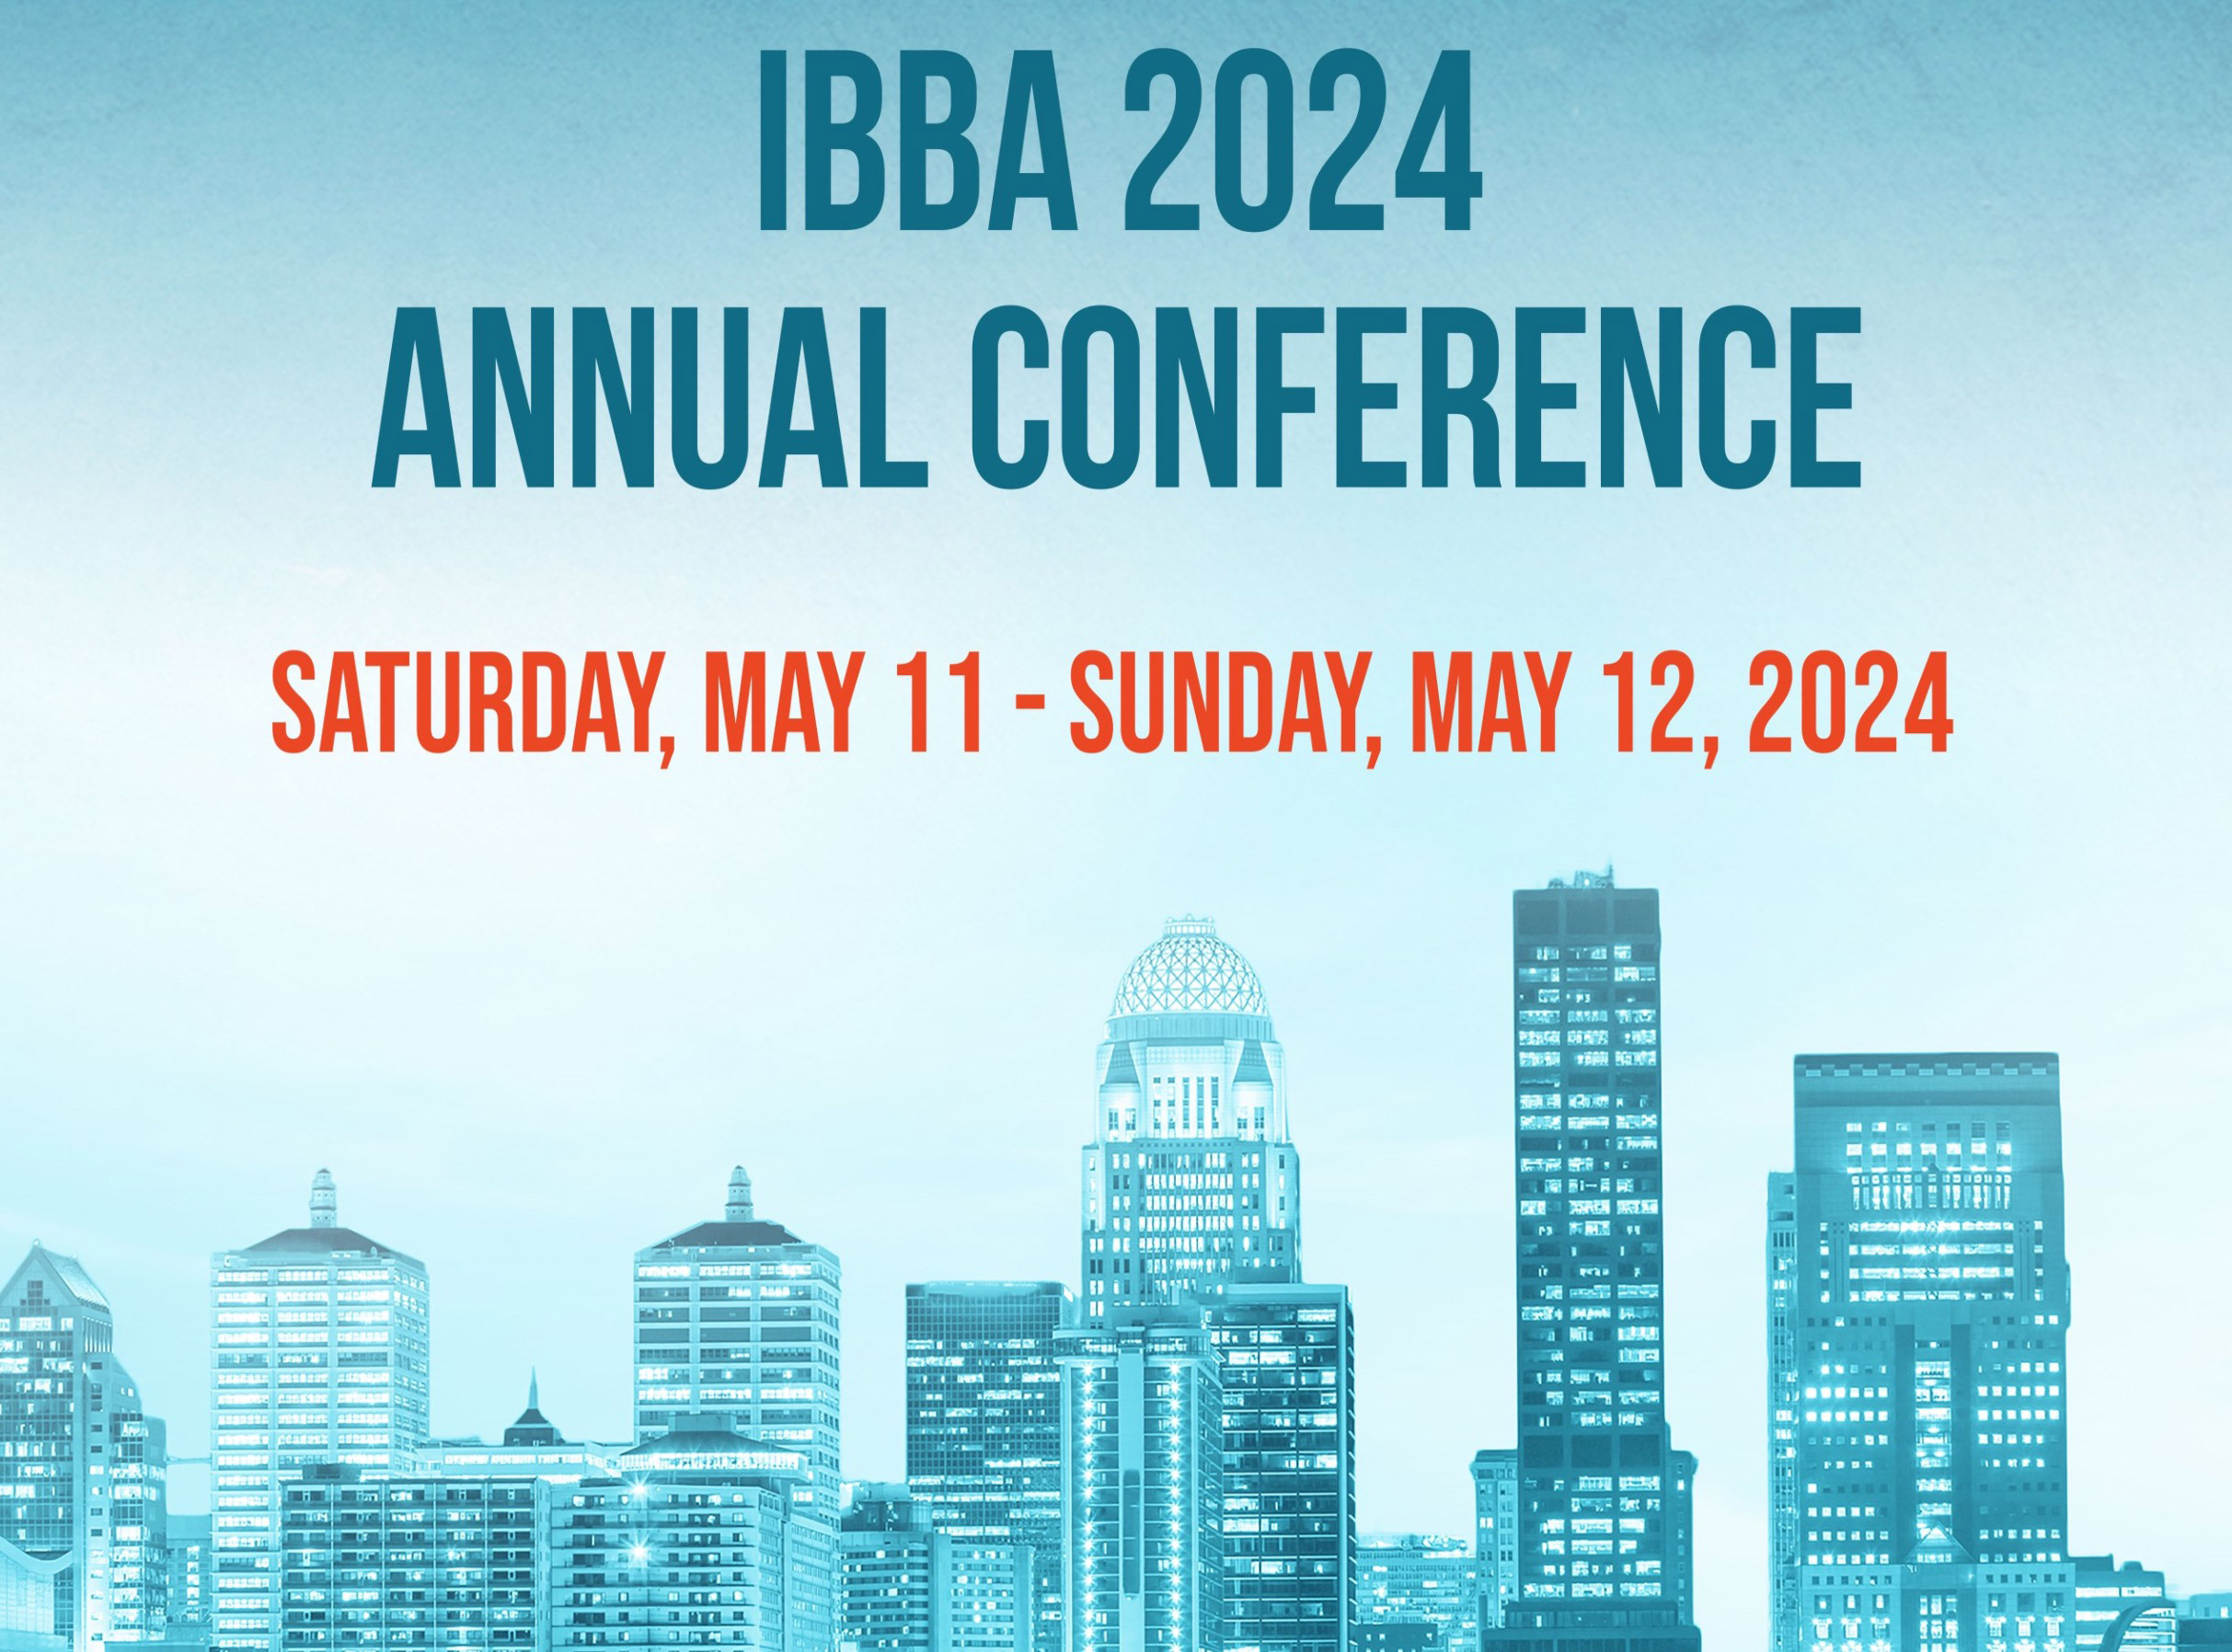 IBBA 2024 Annual Conference